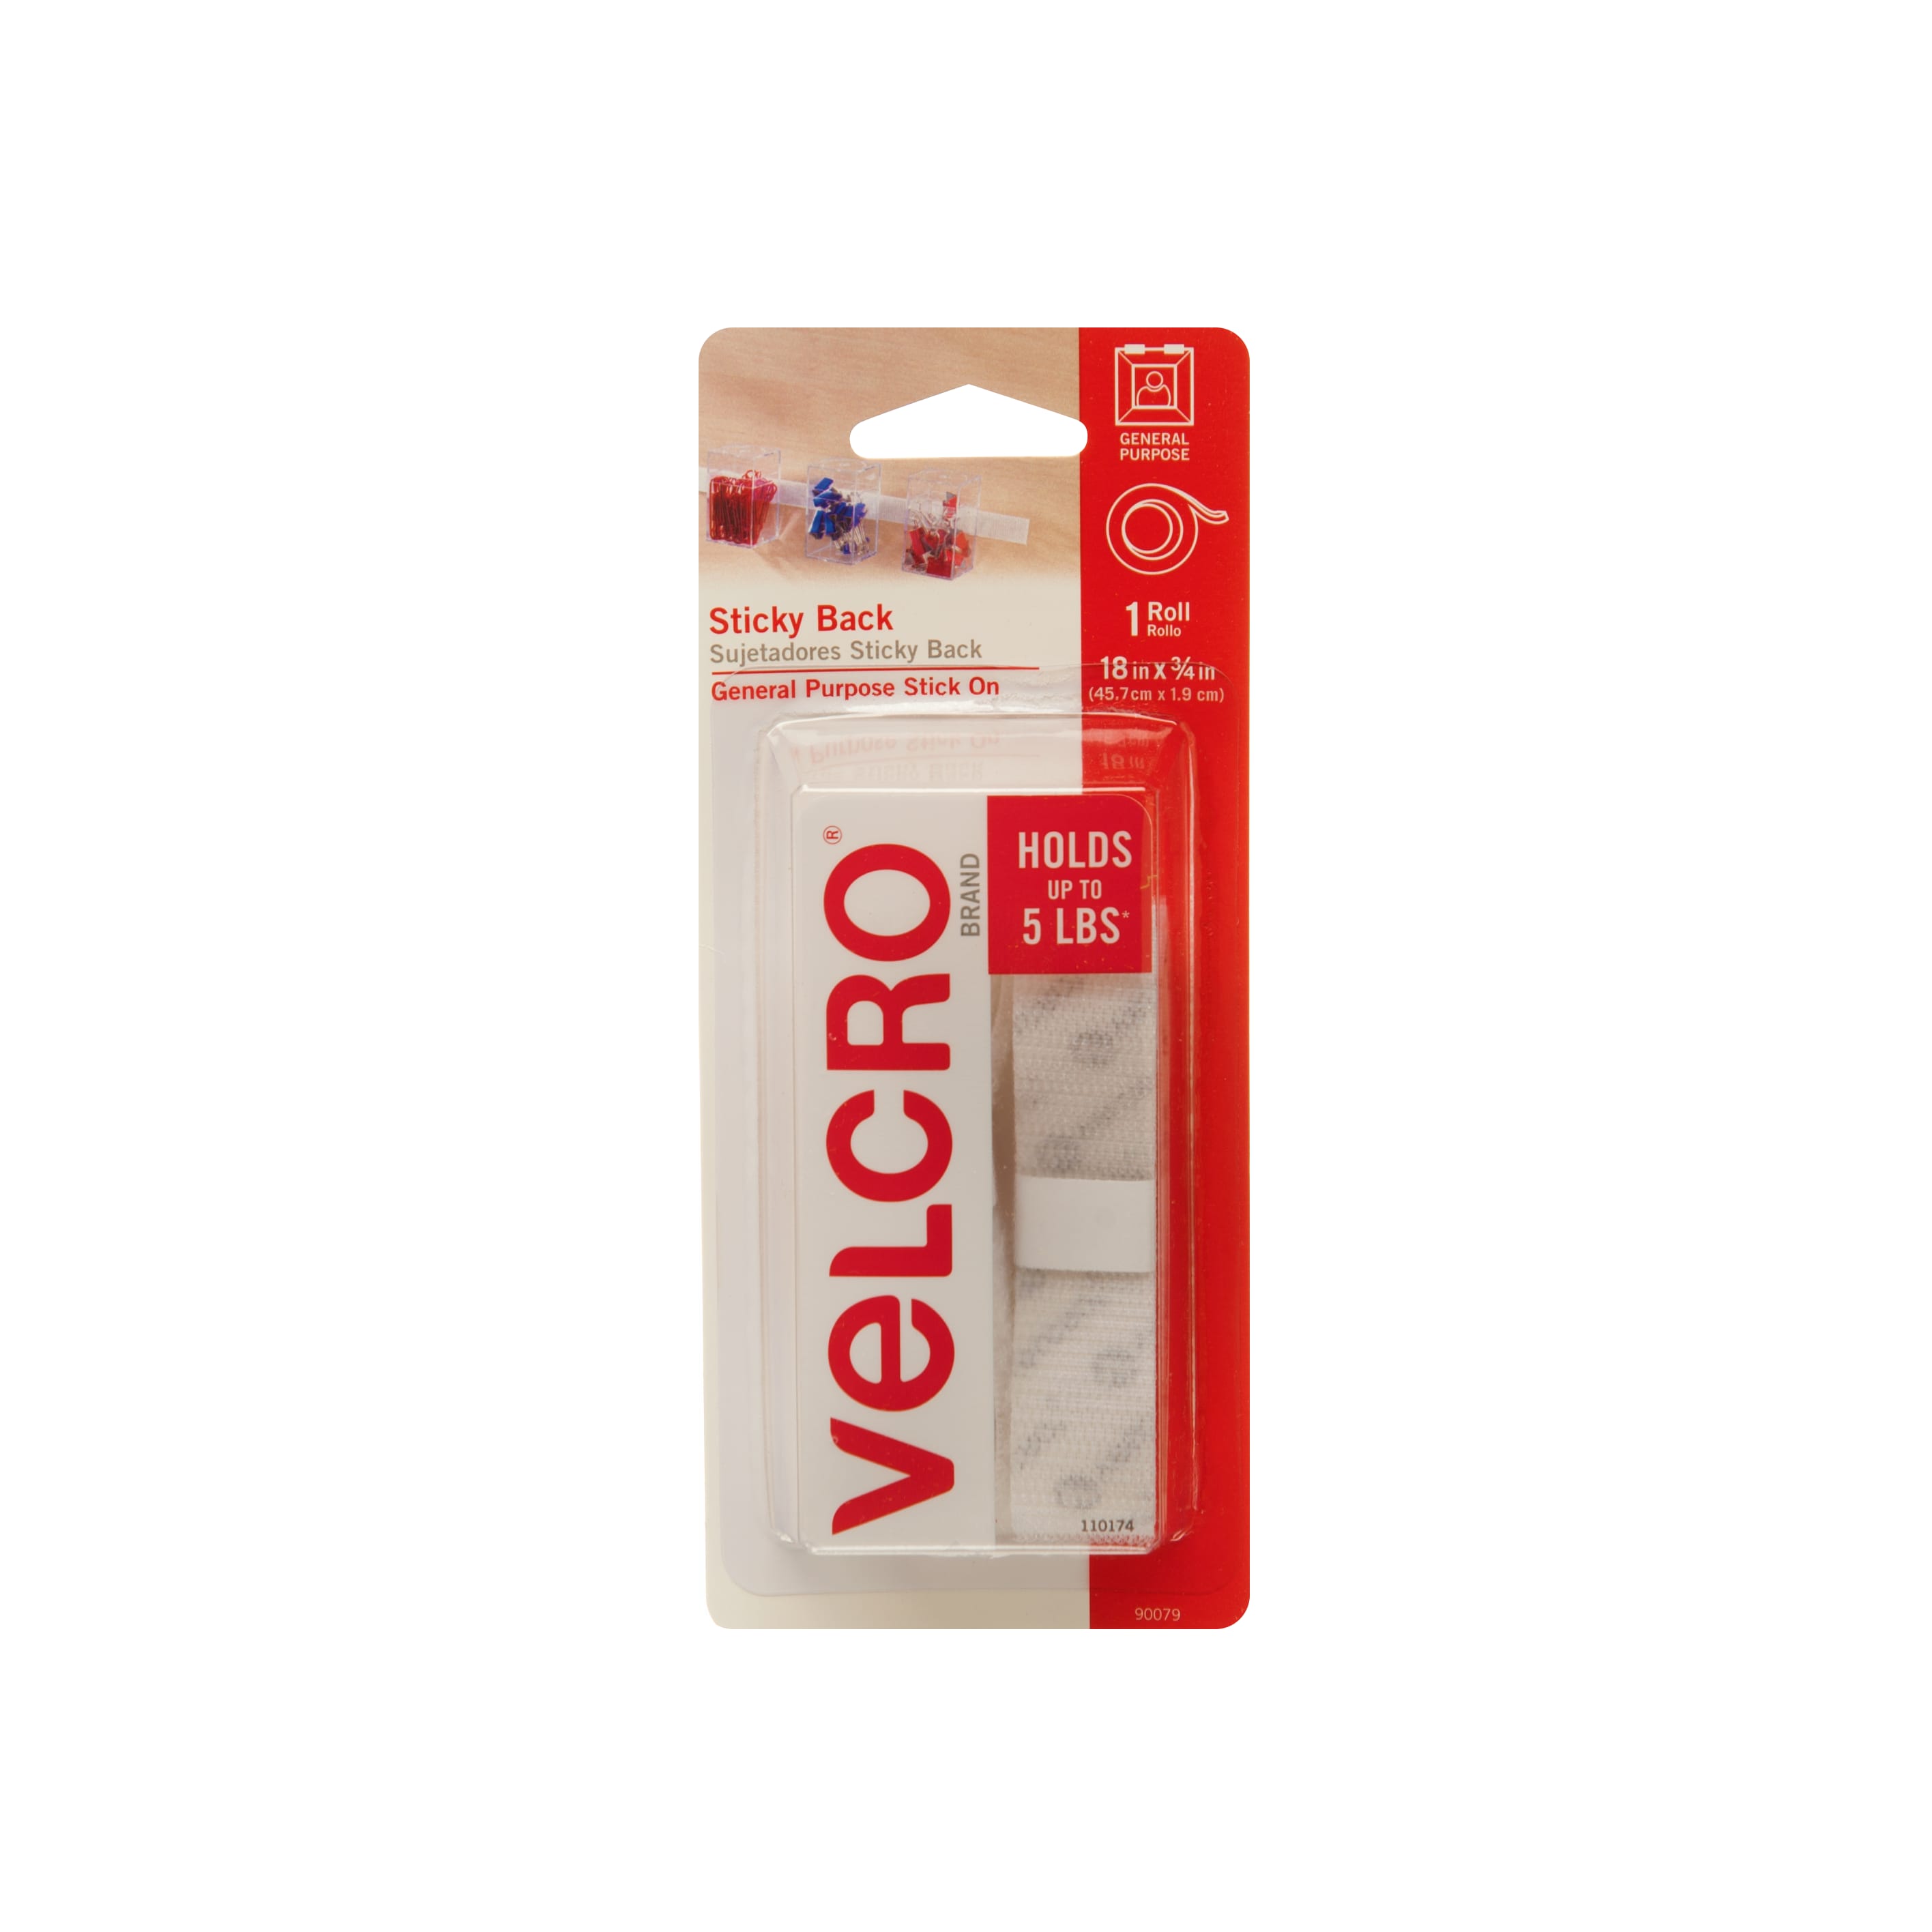  VELCRO Brand Sticky Back Strips with Adhesive